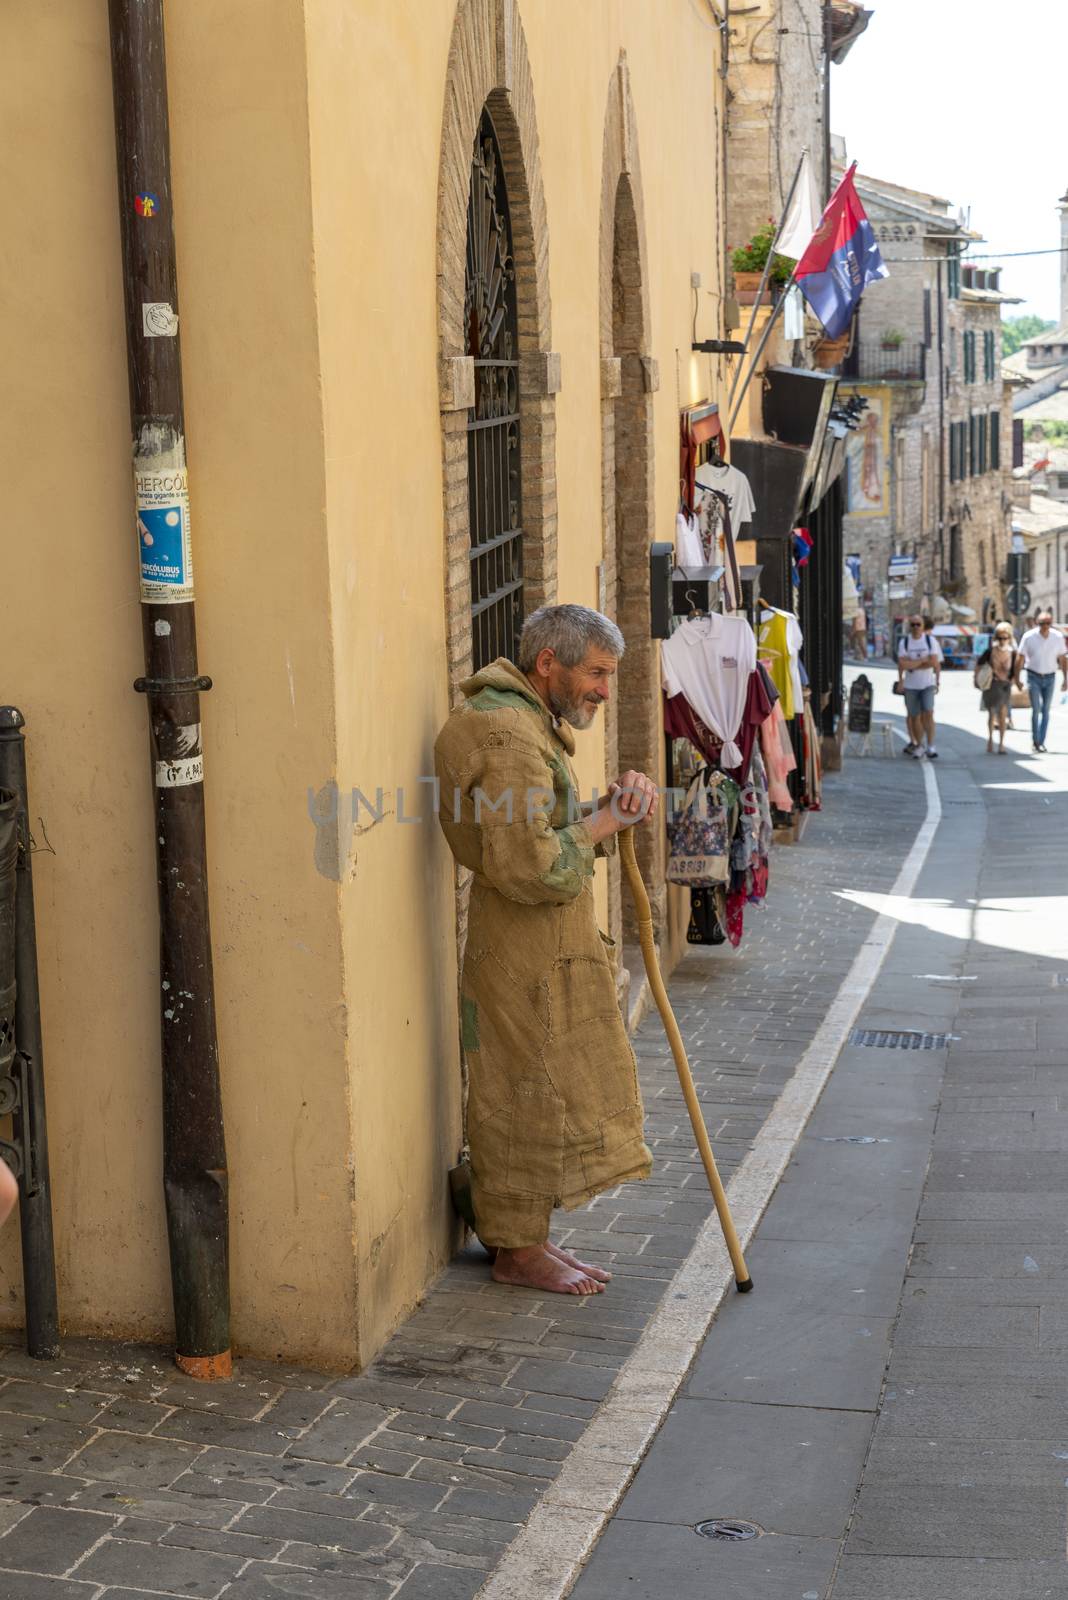 barefoot hermit asking for alms in a street of assisi by carfedeph